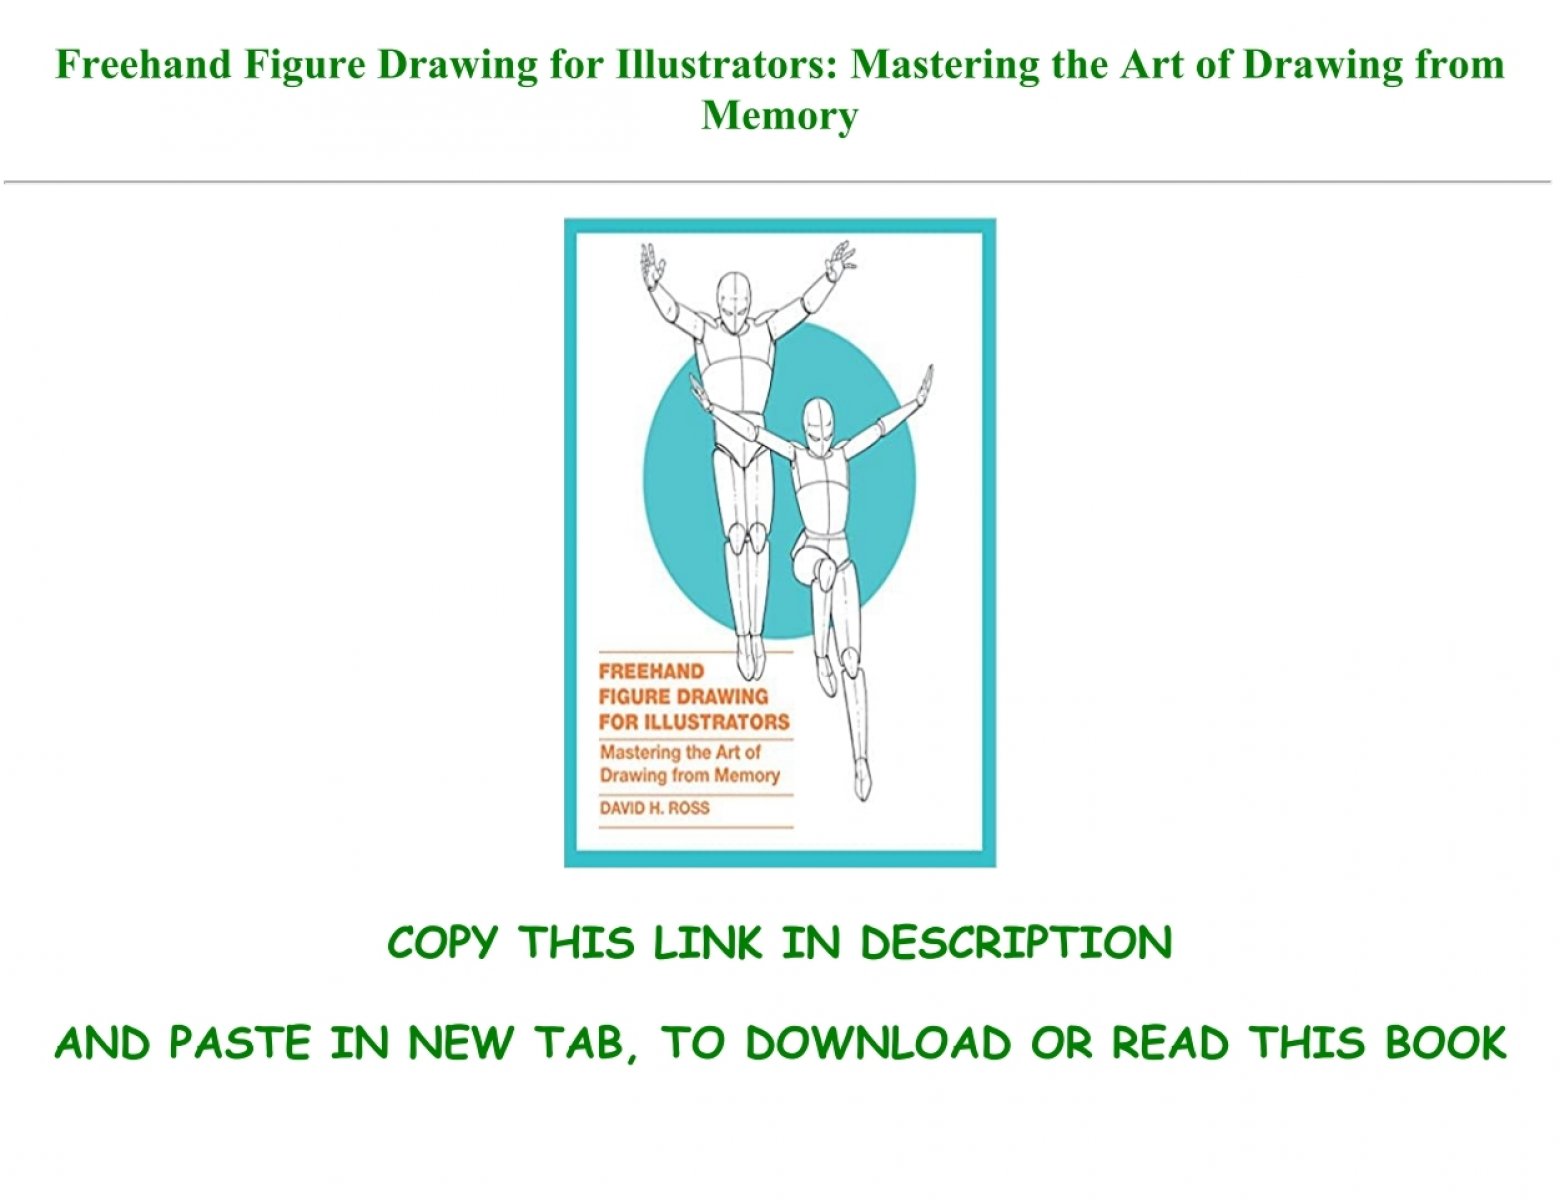 freehand figure drawing for illustrators pdf download